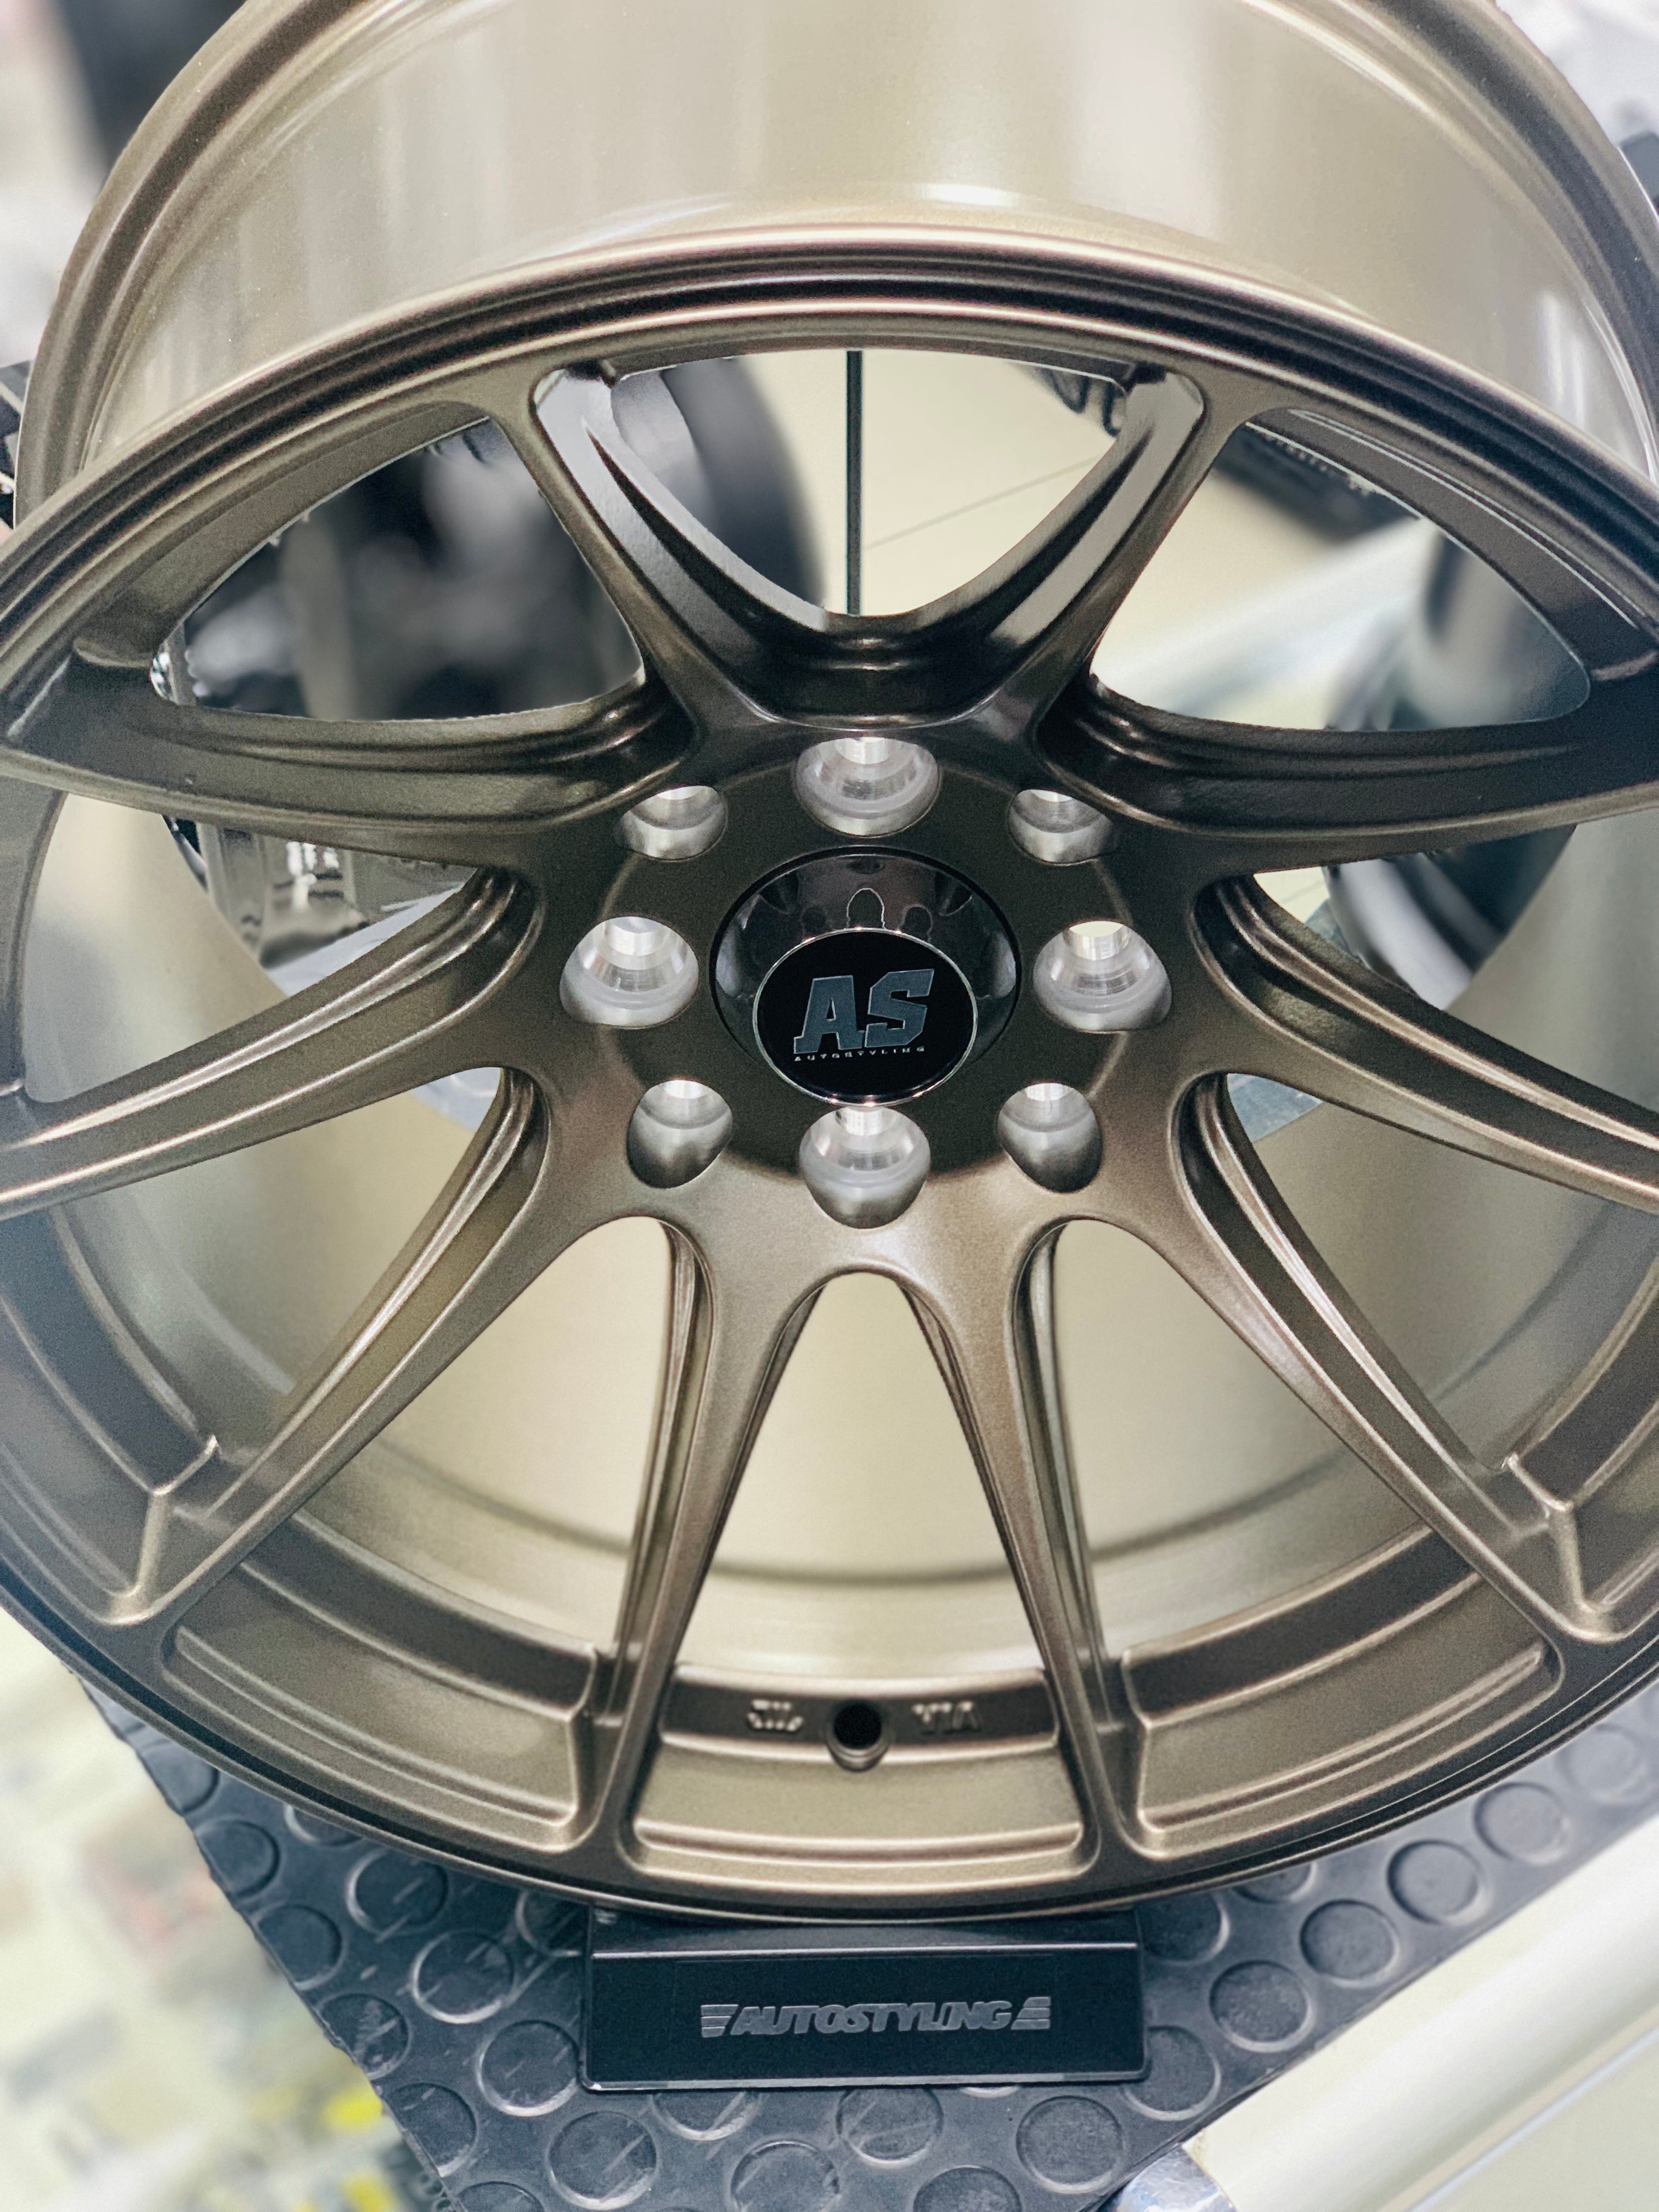 15” AS-XR ULTRA-CONCAVE